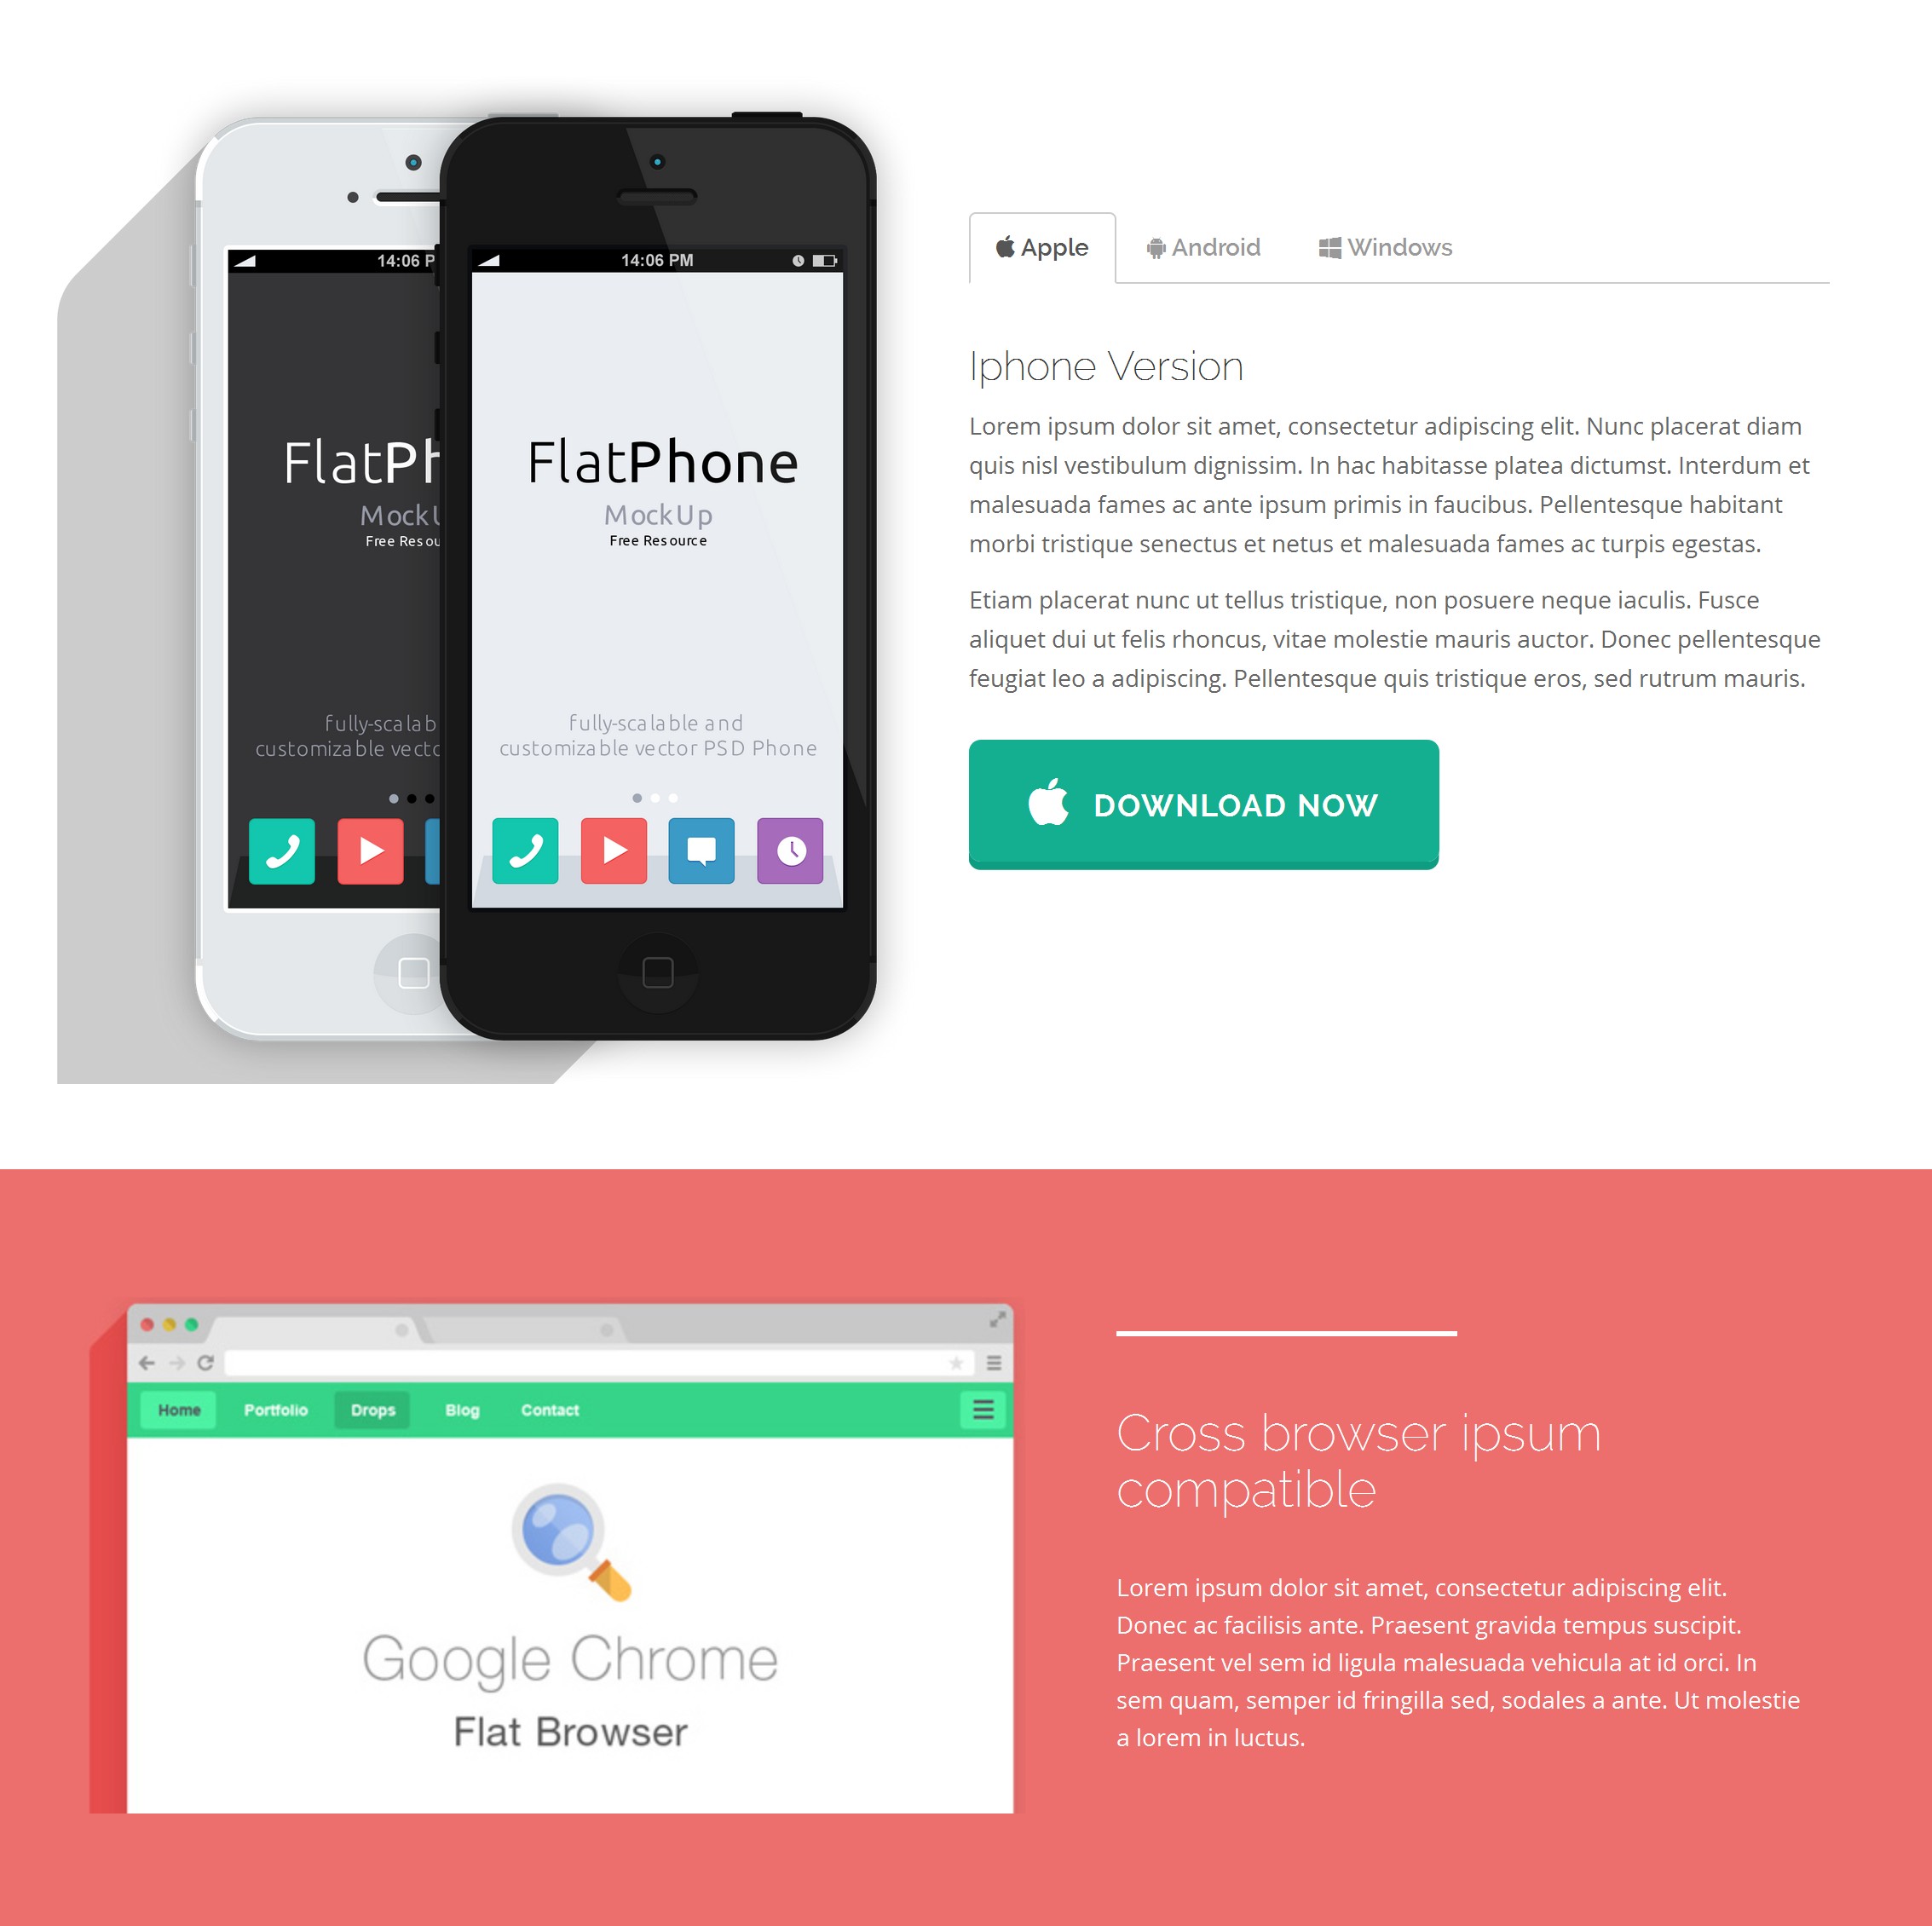 HTML5 Bootstrap Gallery Theme